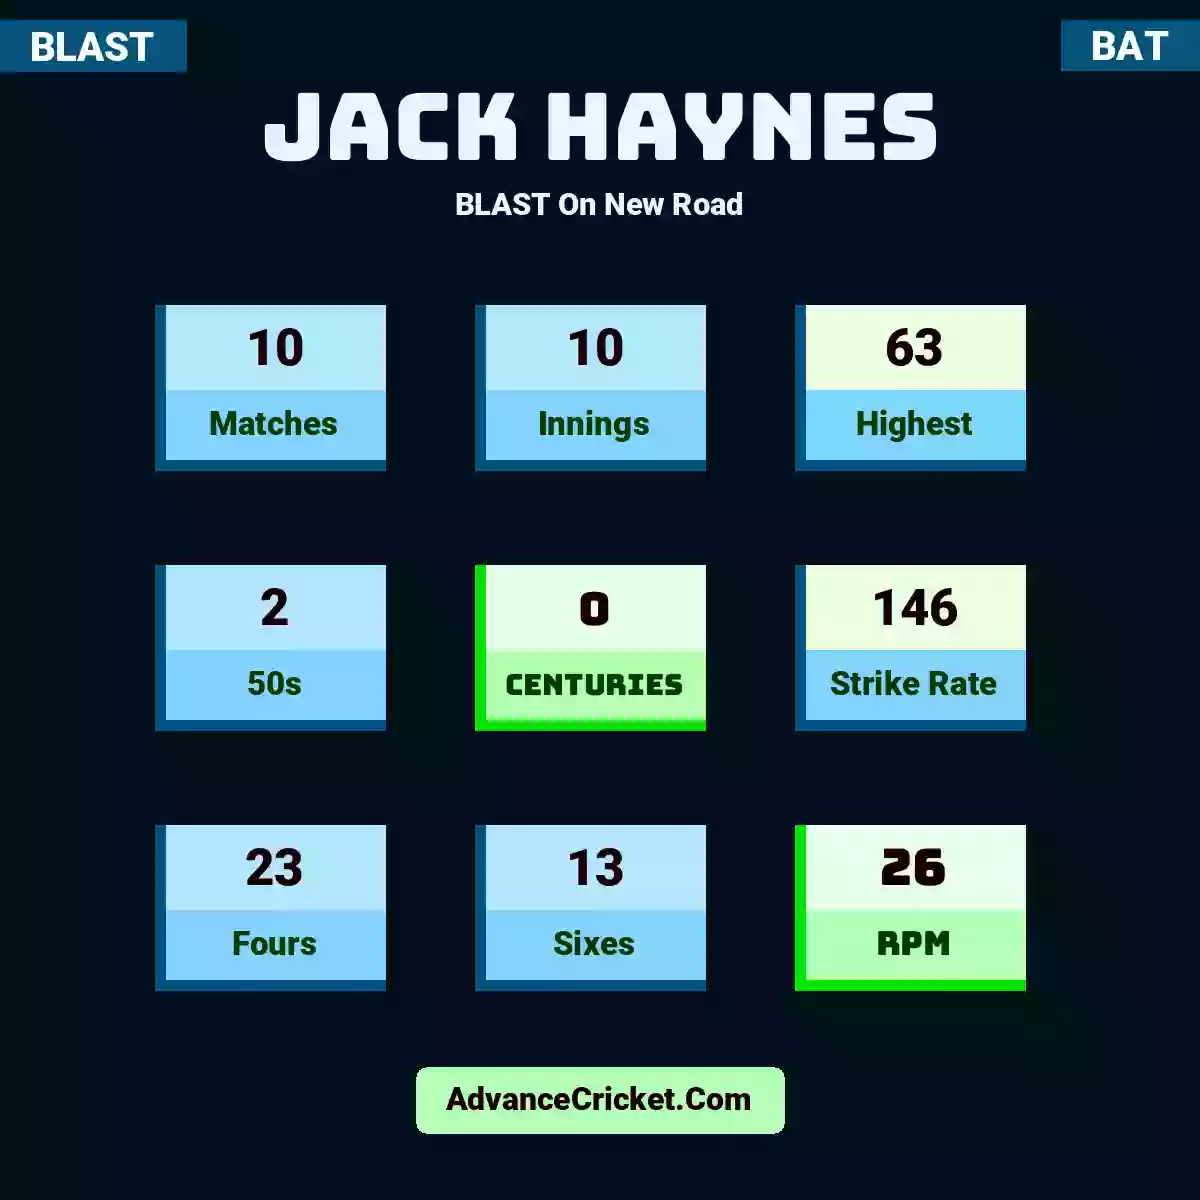 Jack Haynes BLAST  On New Road, Jack Haynes played 10 matches, scored 63 runs as highest, 2 half-centuries, and 0 centuries, with a strike rate of 146. J.Haynes hit 23 fours and 13 sixes, with an RPM of 26.